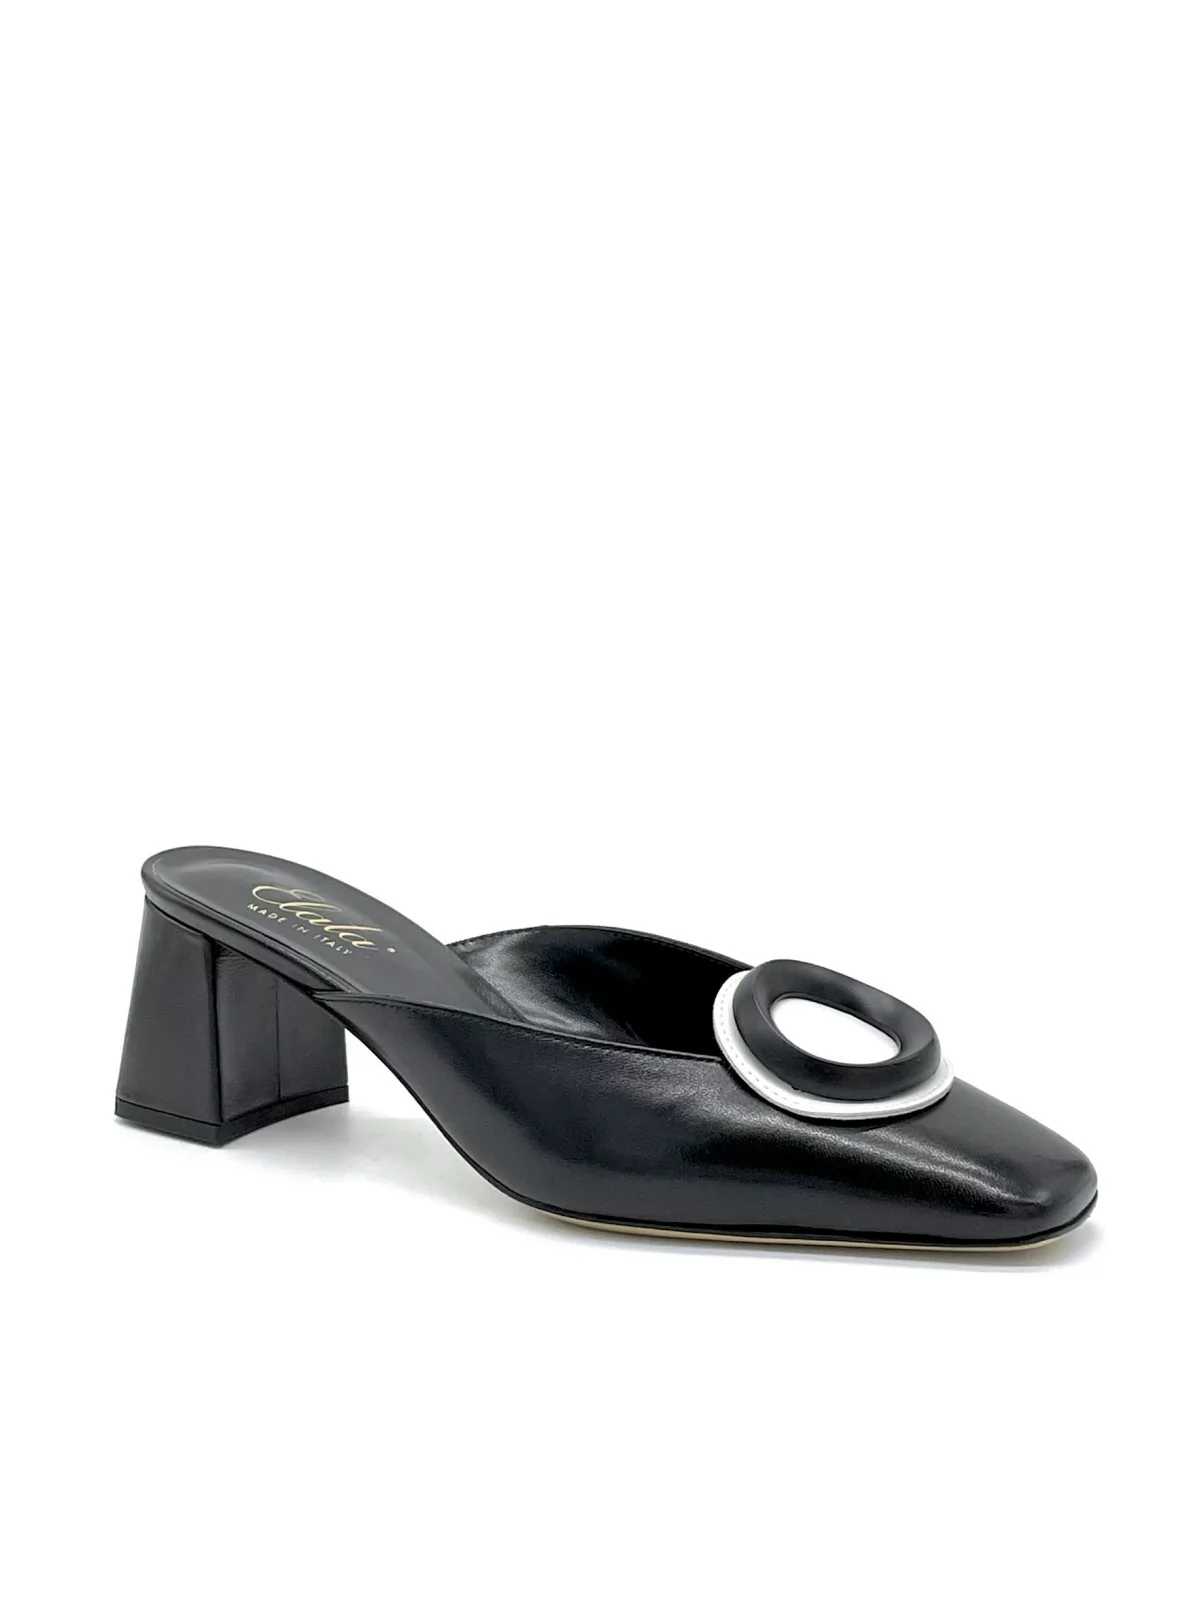 Black leather mule with black/white “circle” accessory. Leather lining. Leat